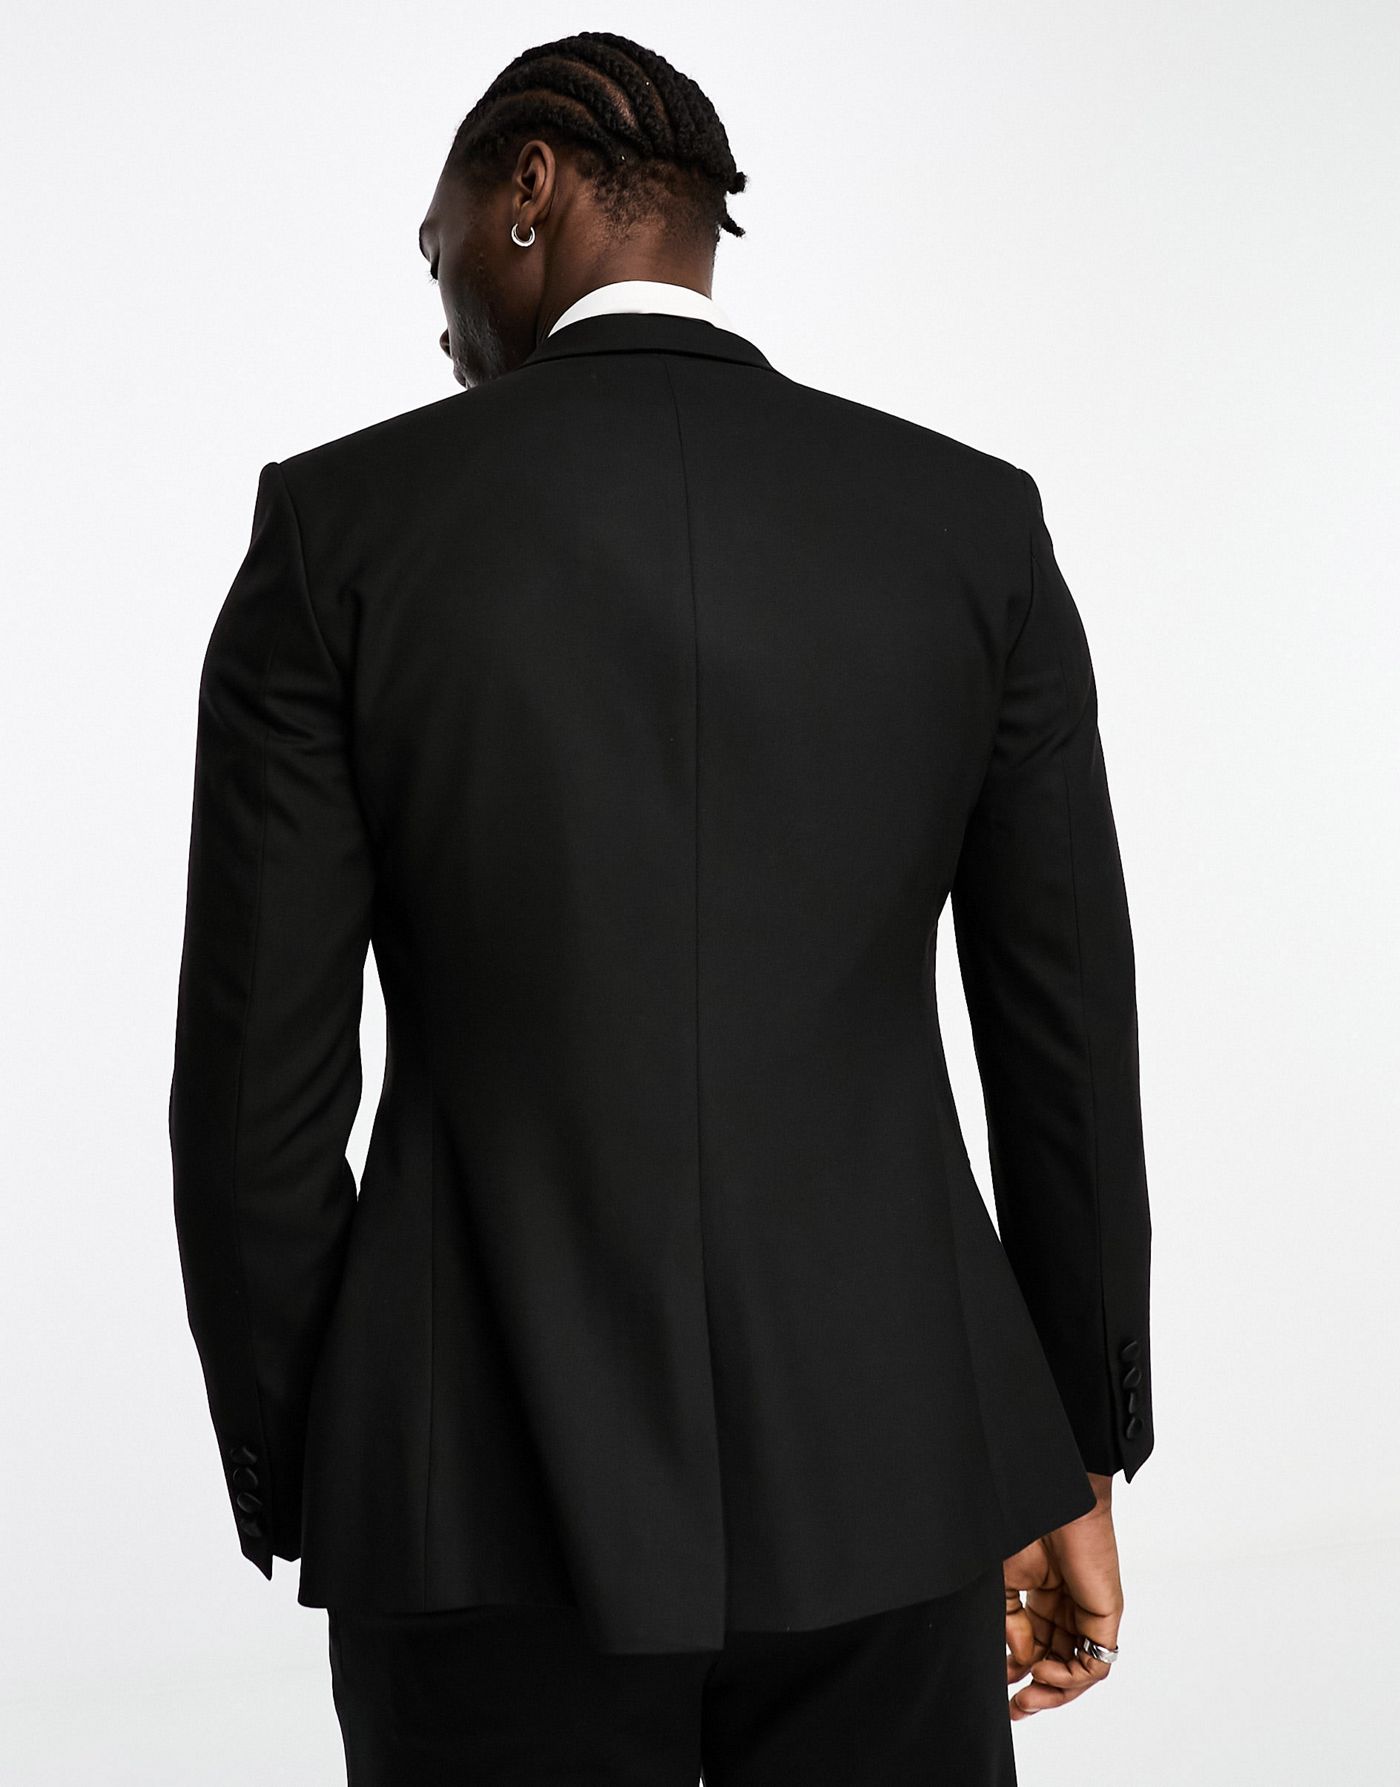 ASOS DESIGN skinny double breasted tuxedo suit jacket in black